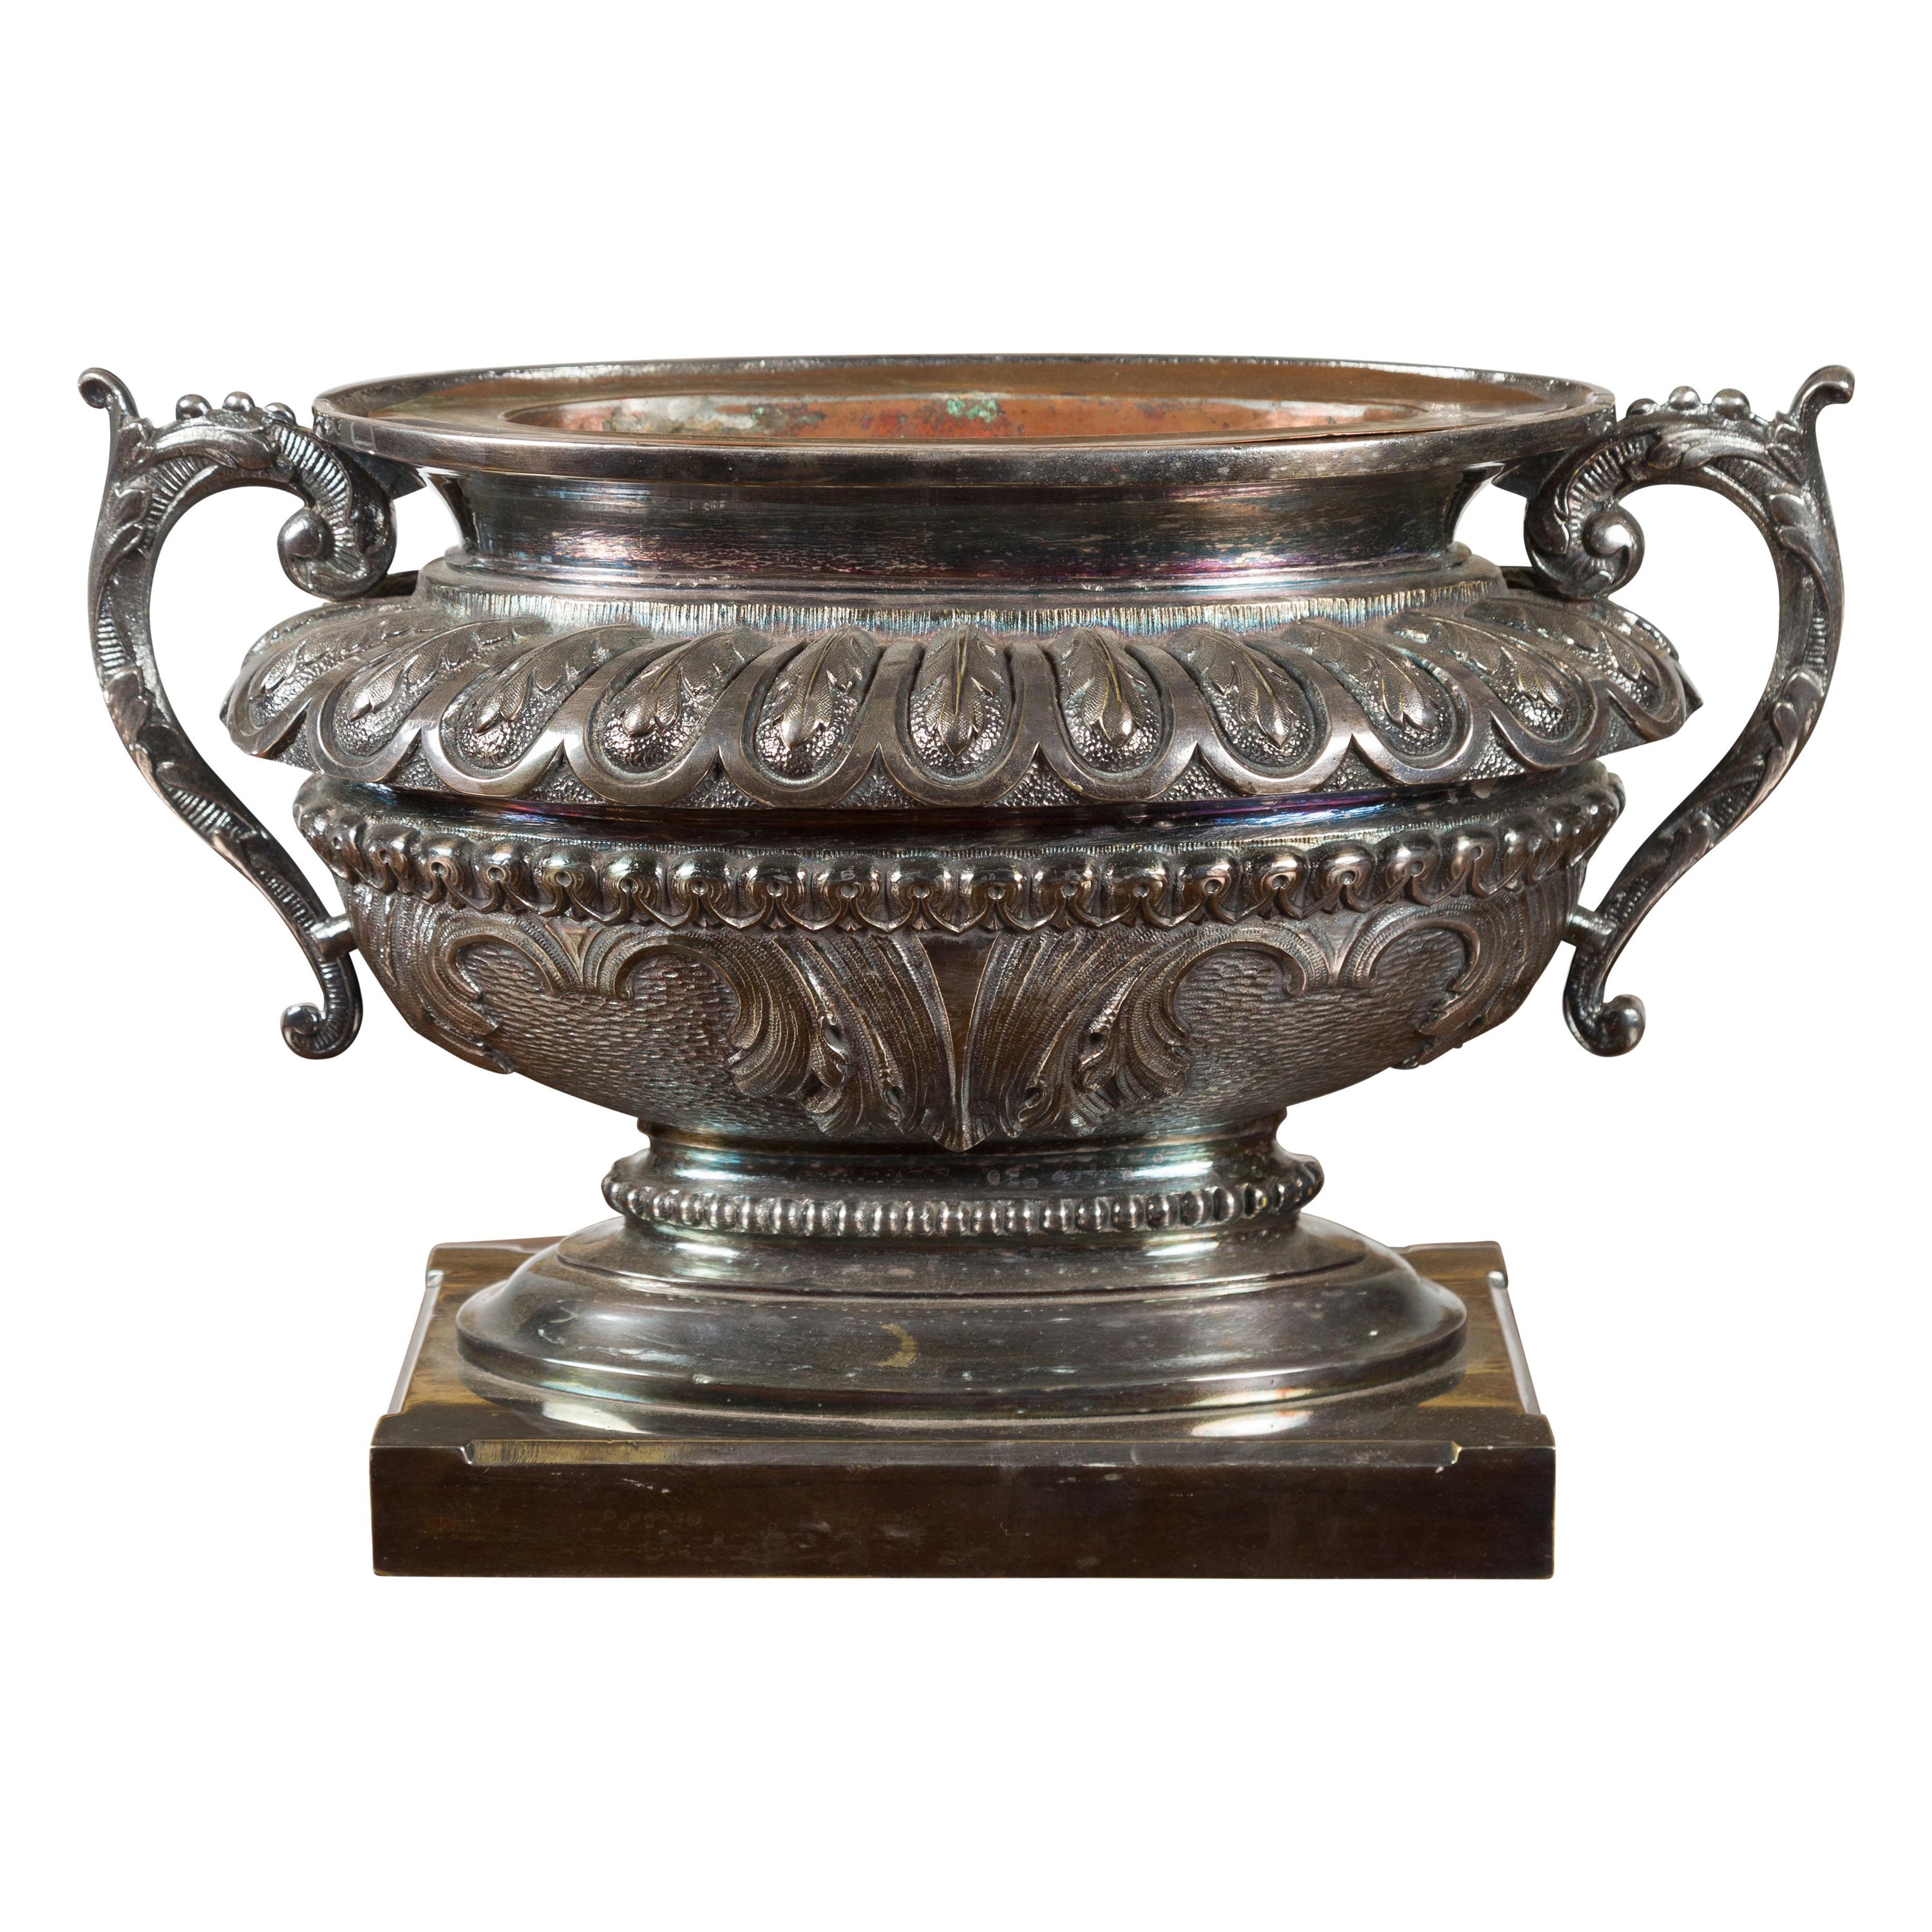 English Silver Plate Oval Cachepot with Copper Liner and Foliage Motifs